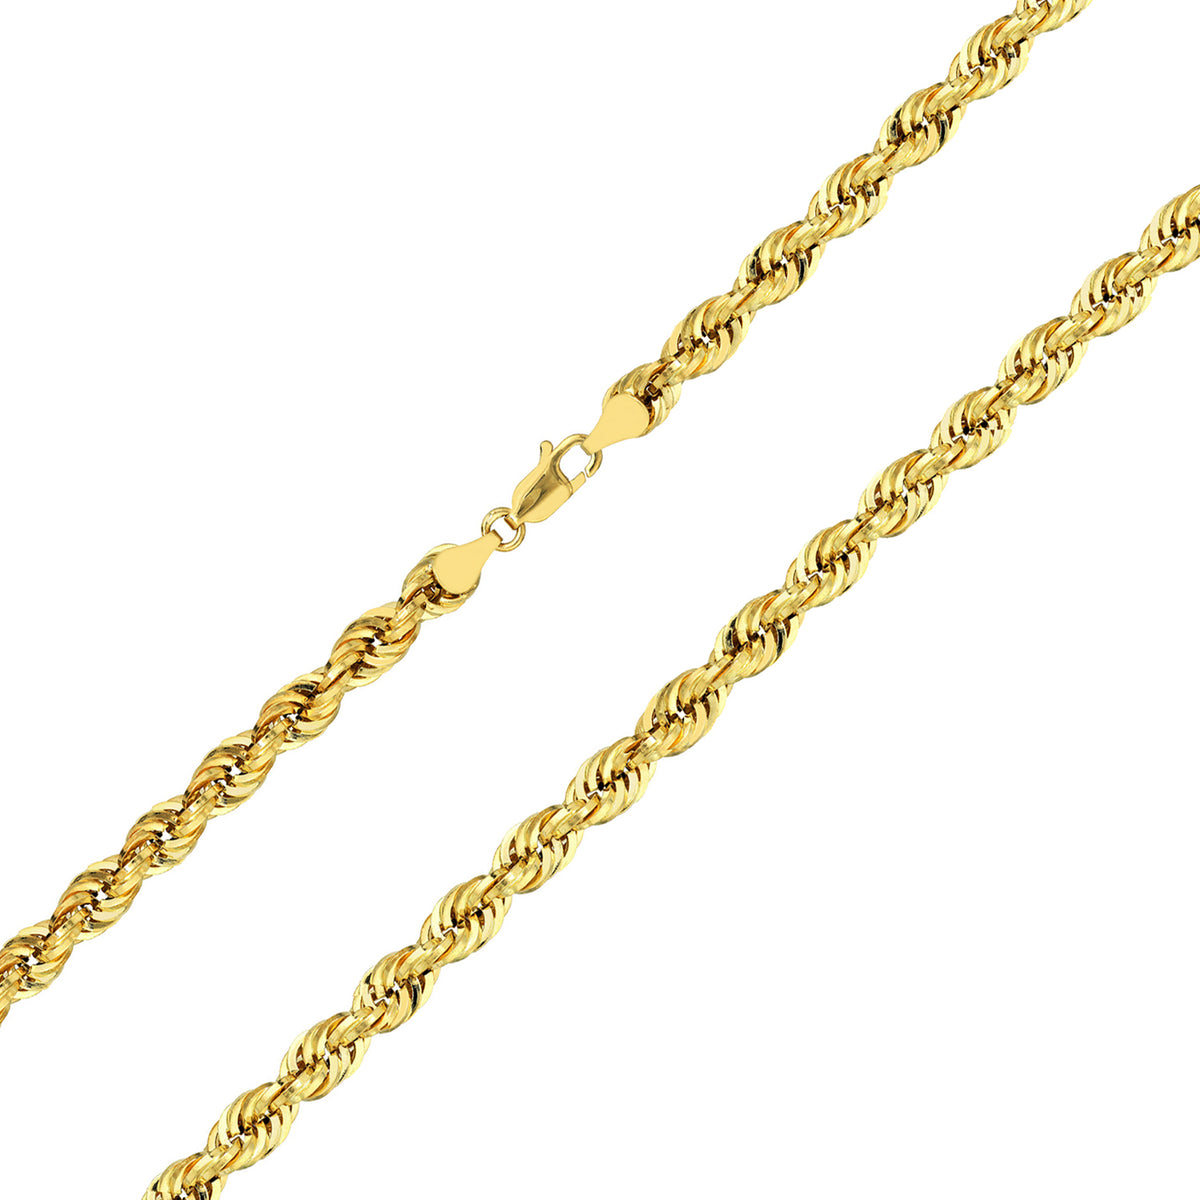 Solid 14k Yellow Gold 4mm Rope Chain Necklace with Lobster Lock - Diamond-Cut